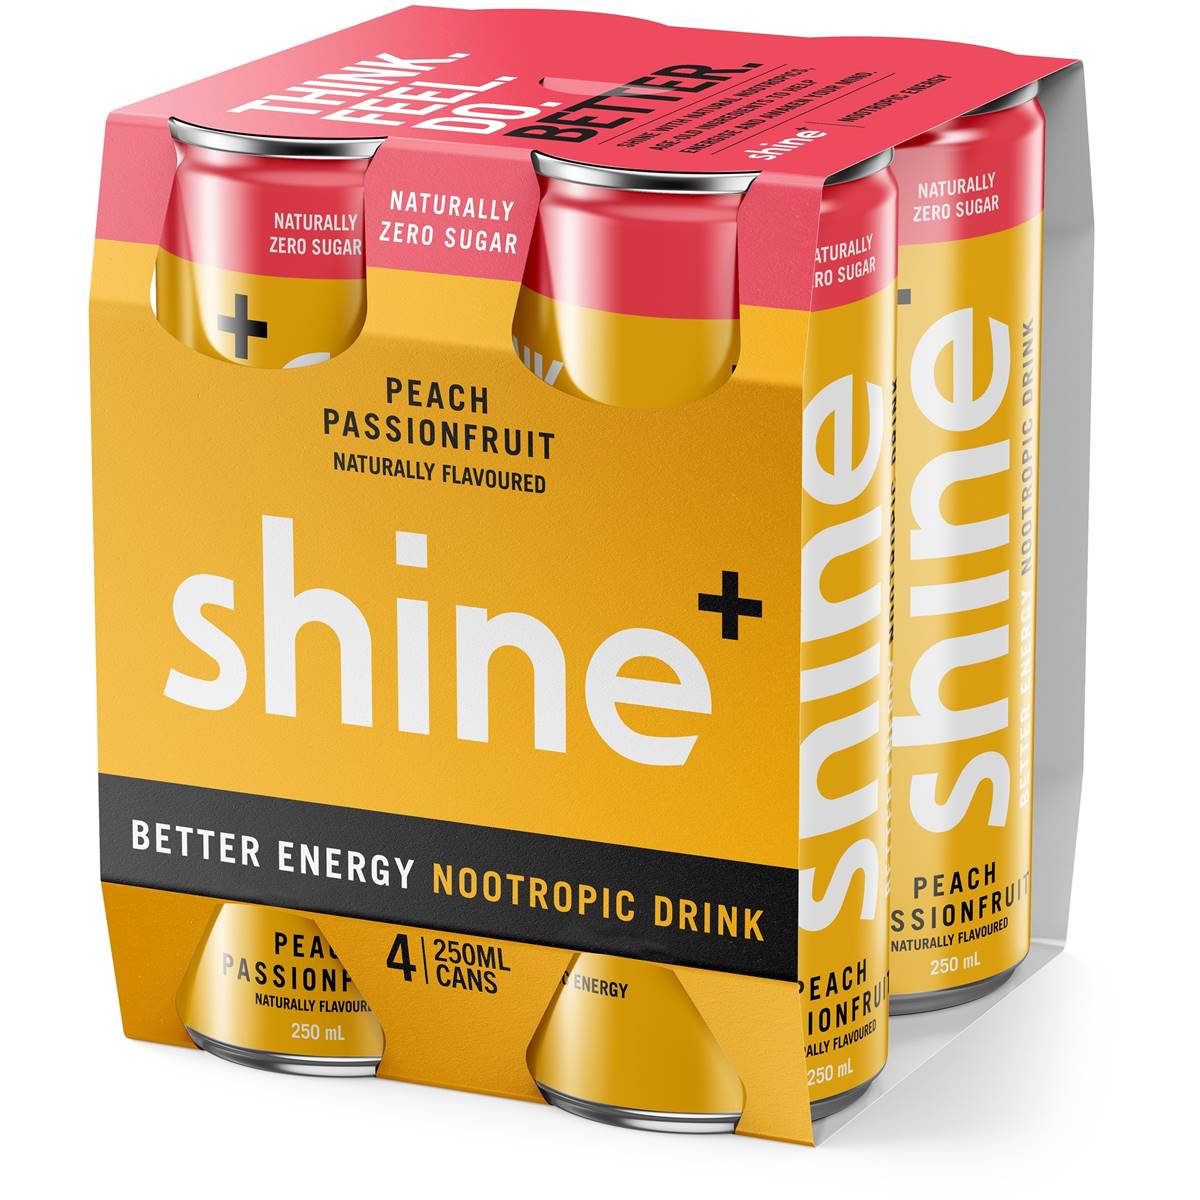 Calories in Shine Naturally Zero Sugar Peach Passionfruit Nootropic Cans